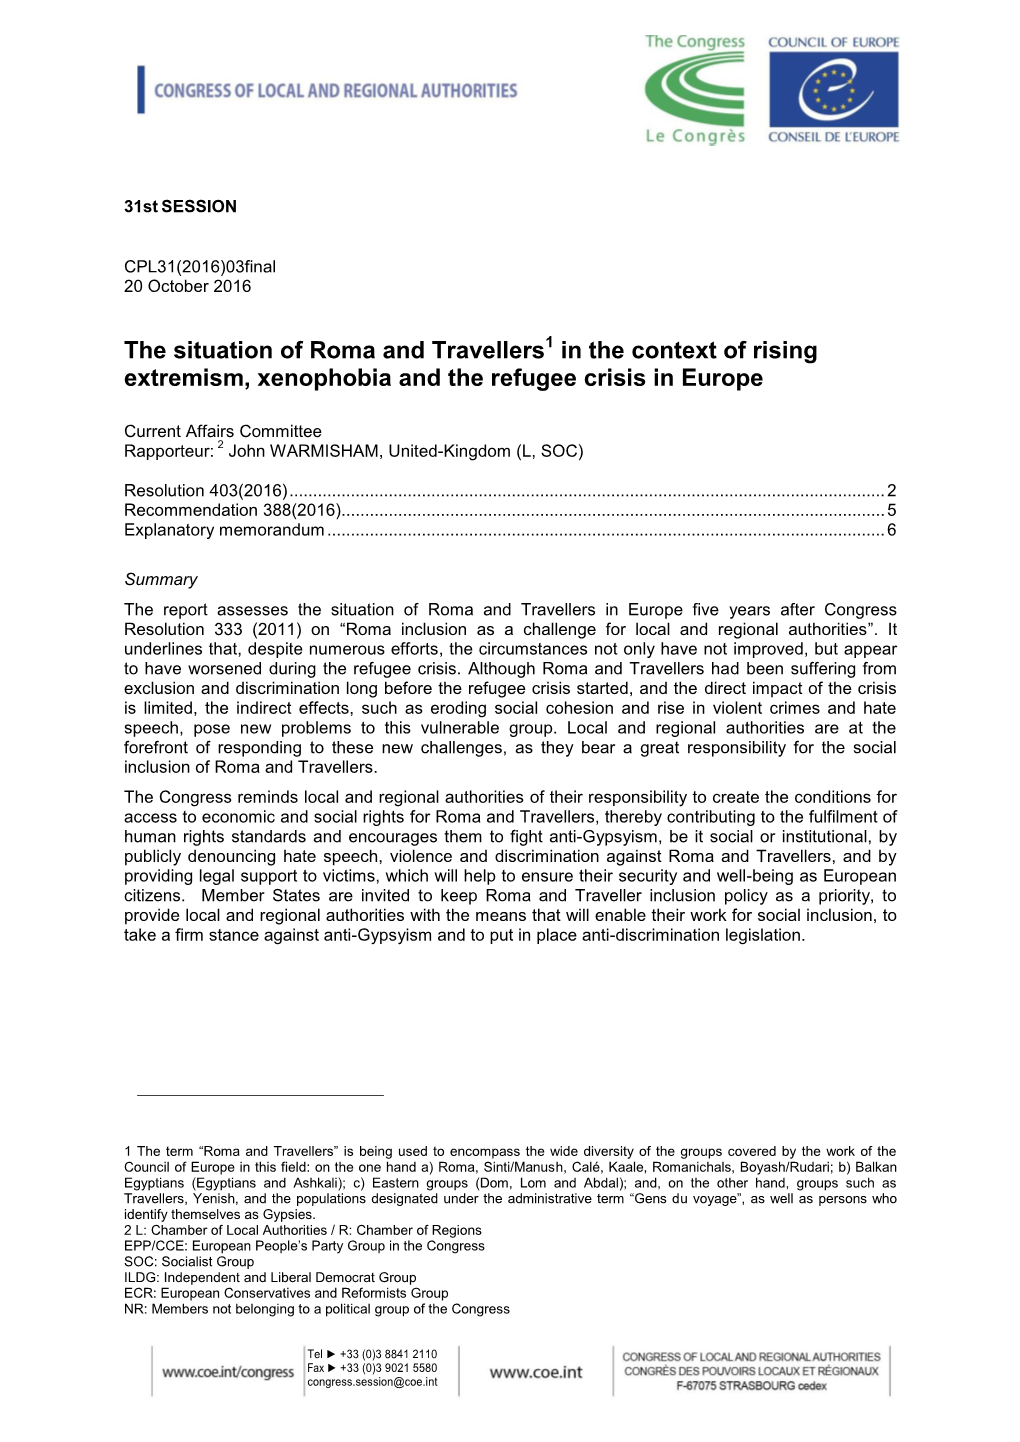 The Situation of Roma and Travellers in the Context of Rising Extremism, Xenophobia and the Refugee Crisis in Europe